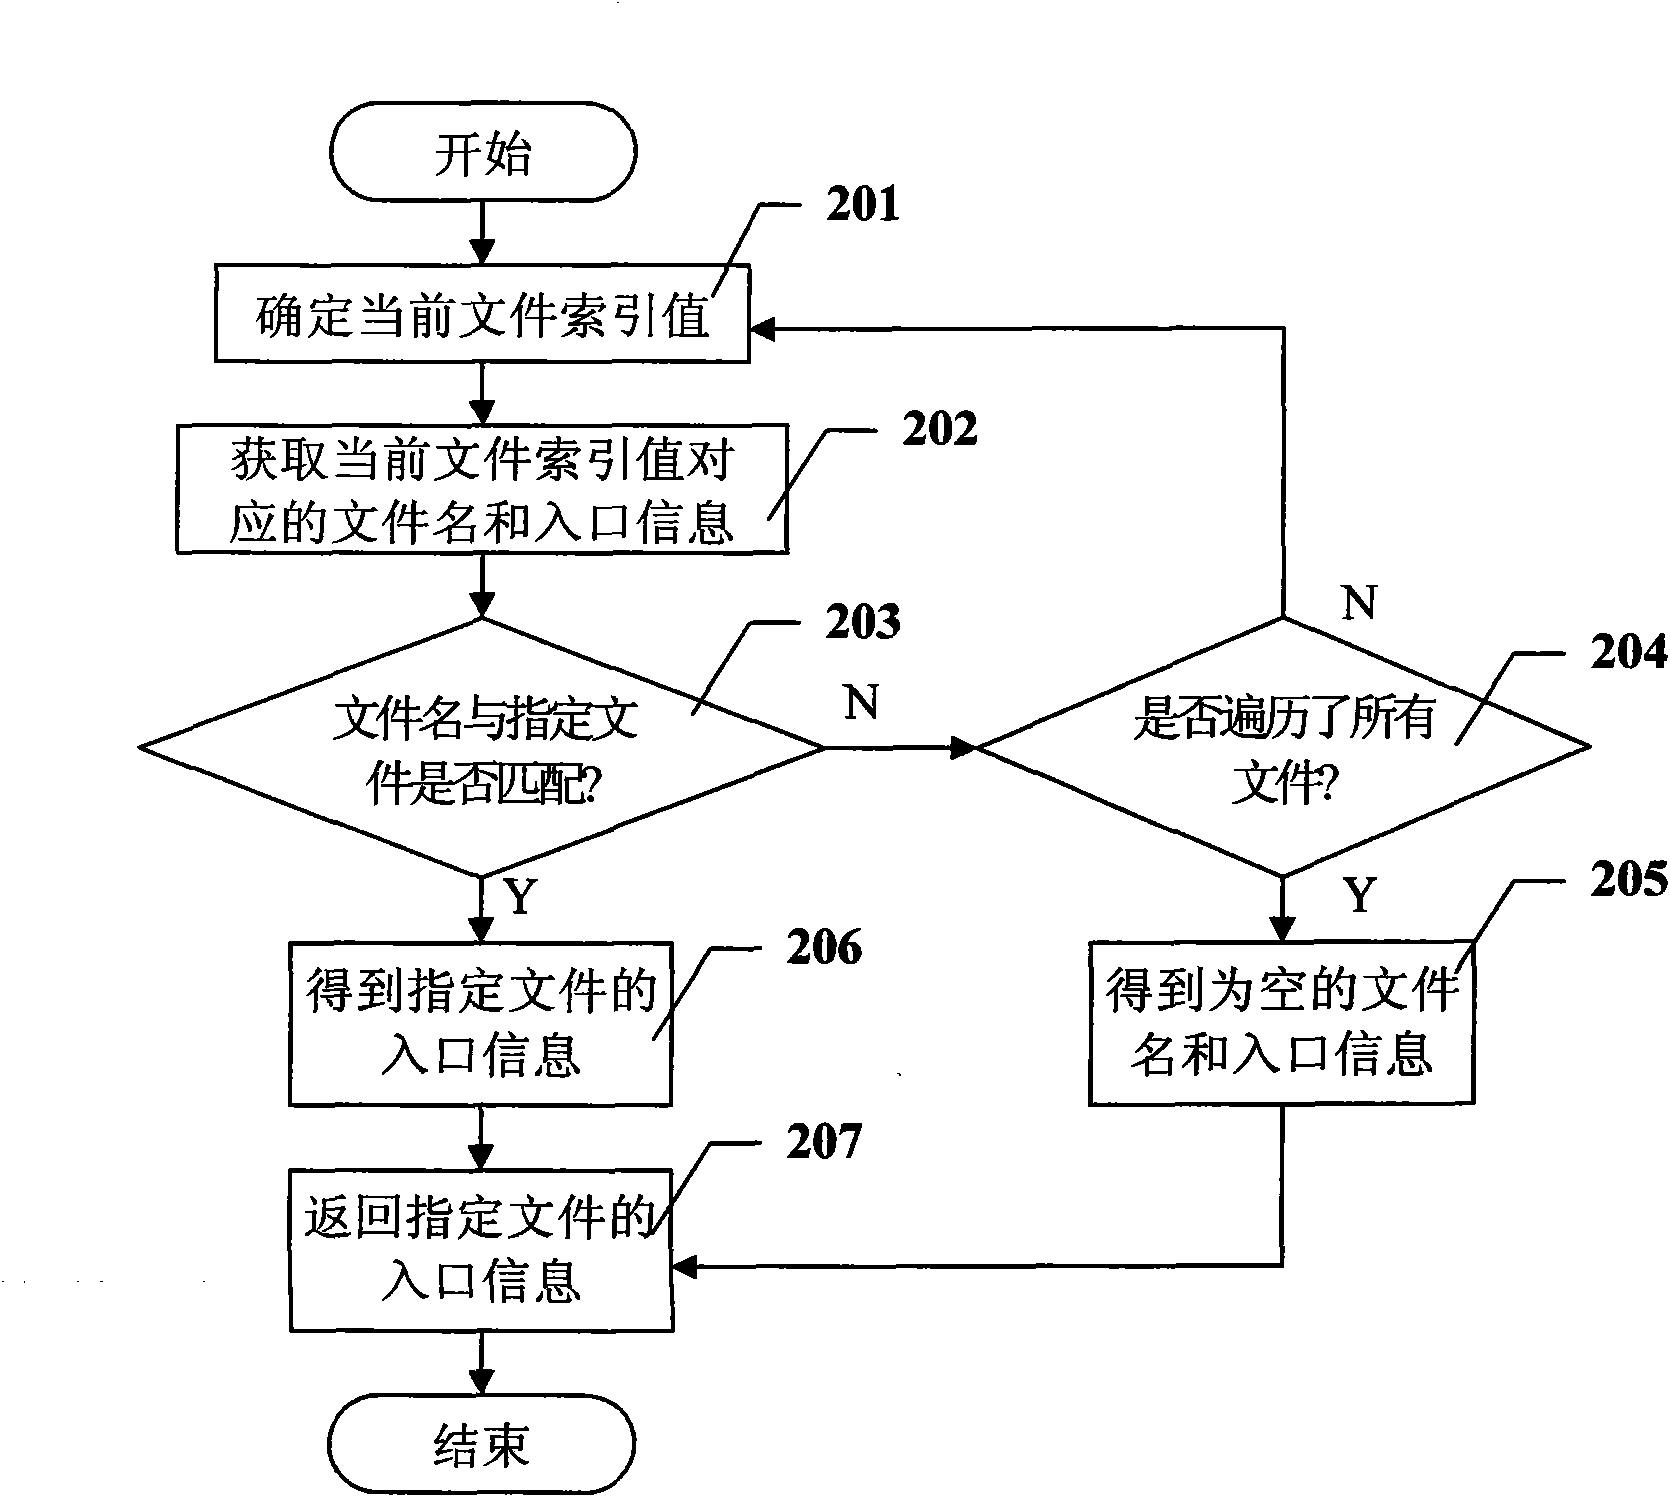 Method for decompressing large-data-volume package in mobile rich media application